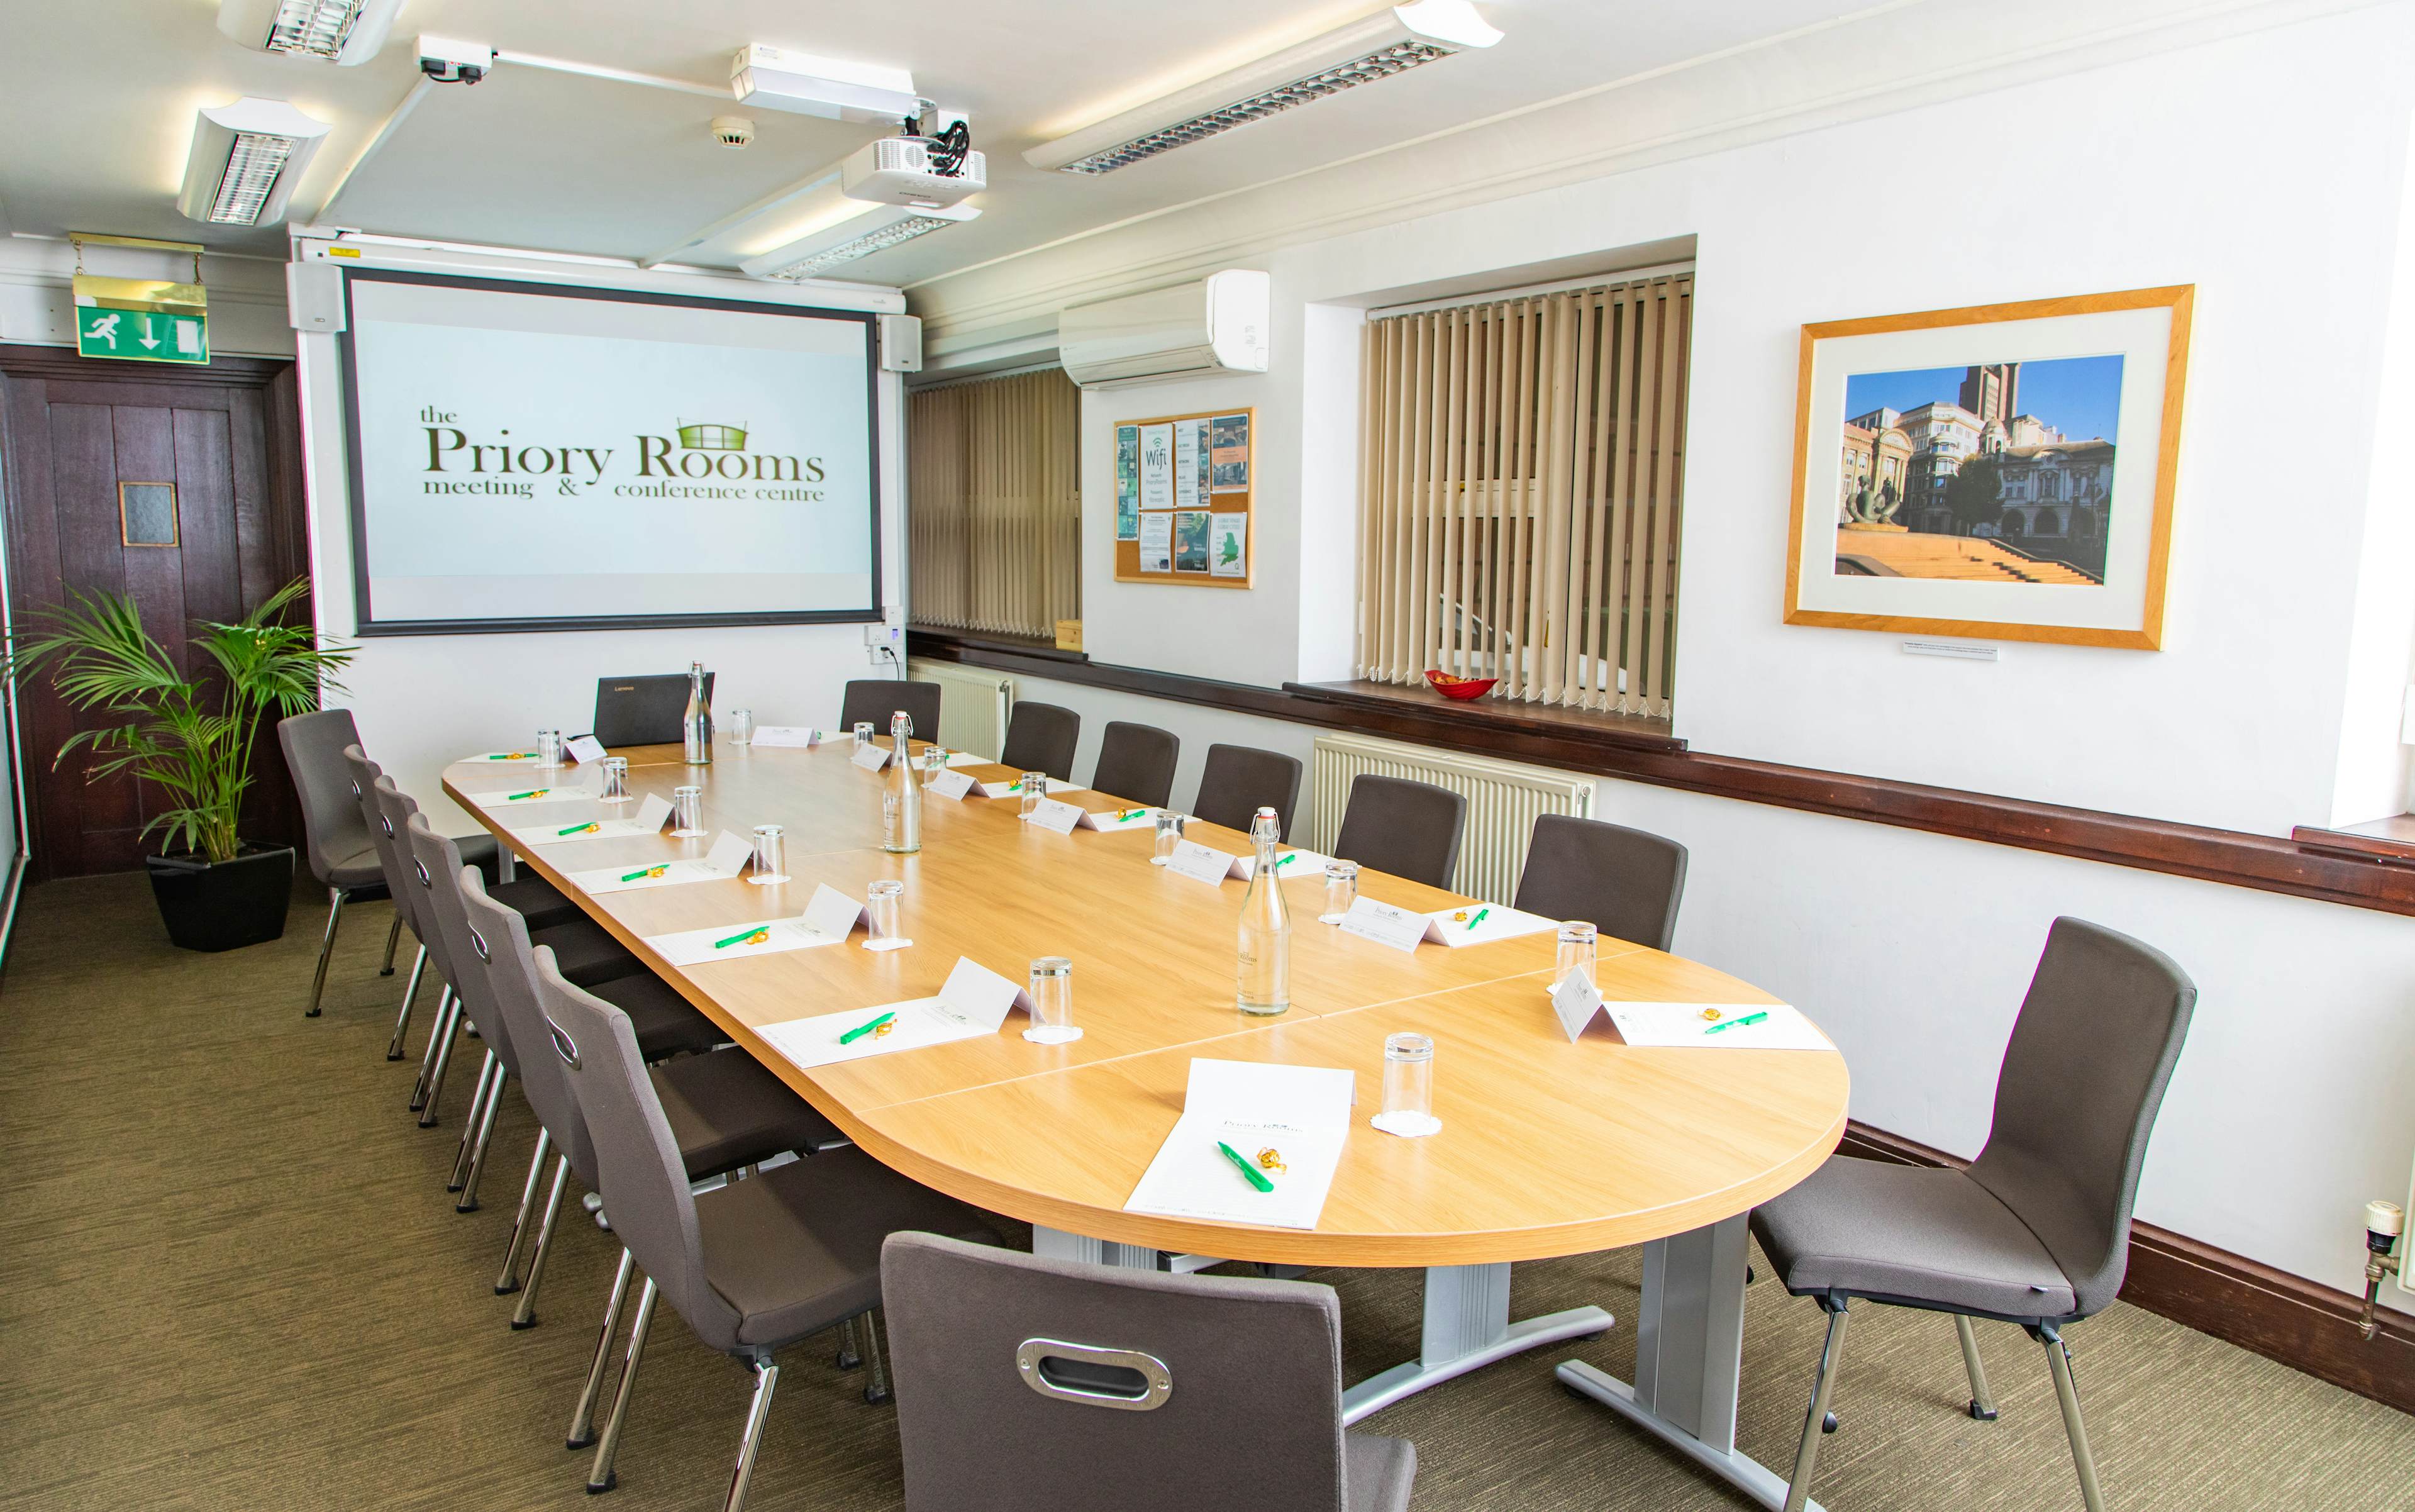 The Priory Rooms Meeting and Conference Centre  - Lloyd room image 1